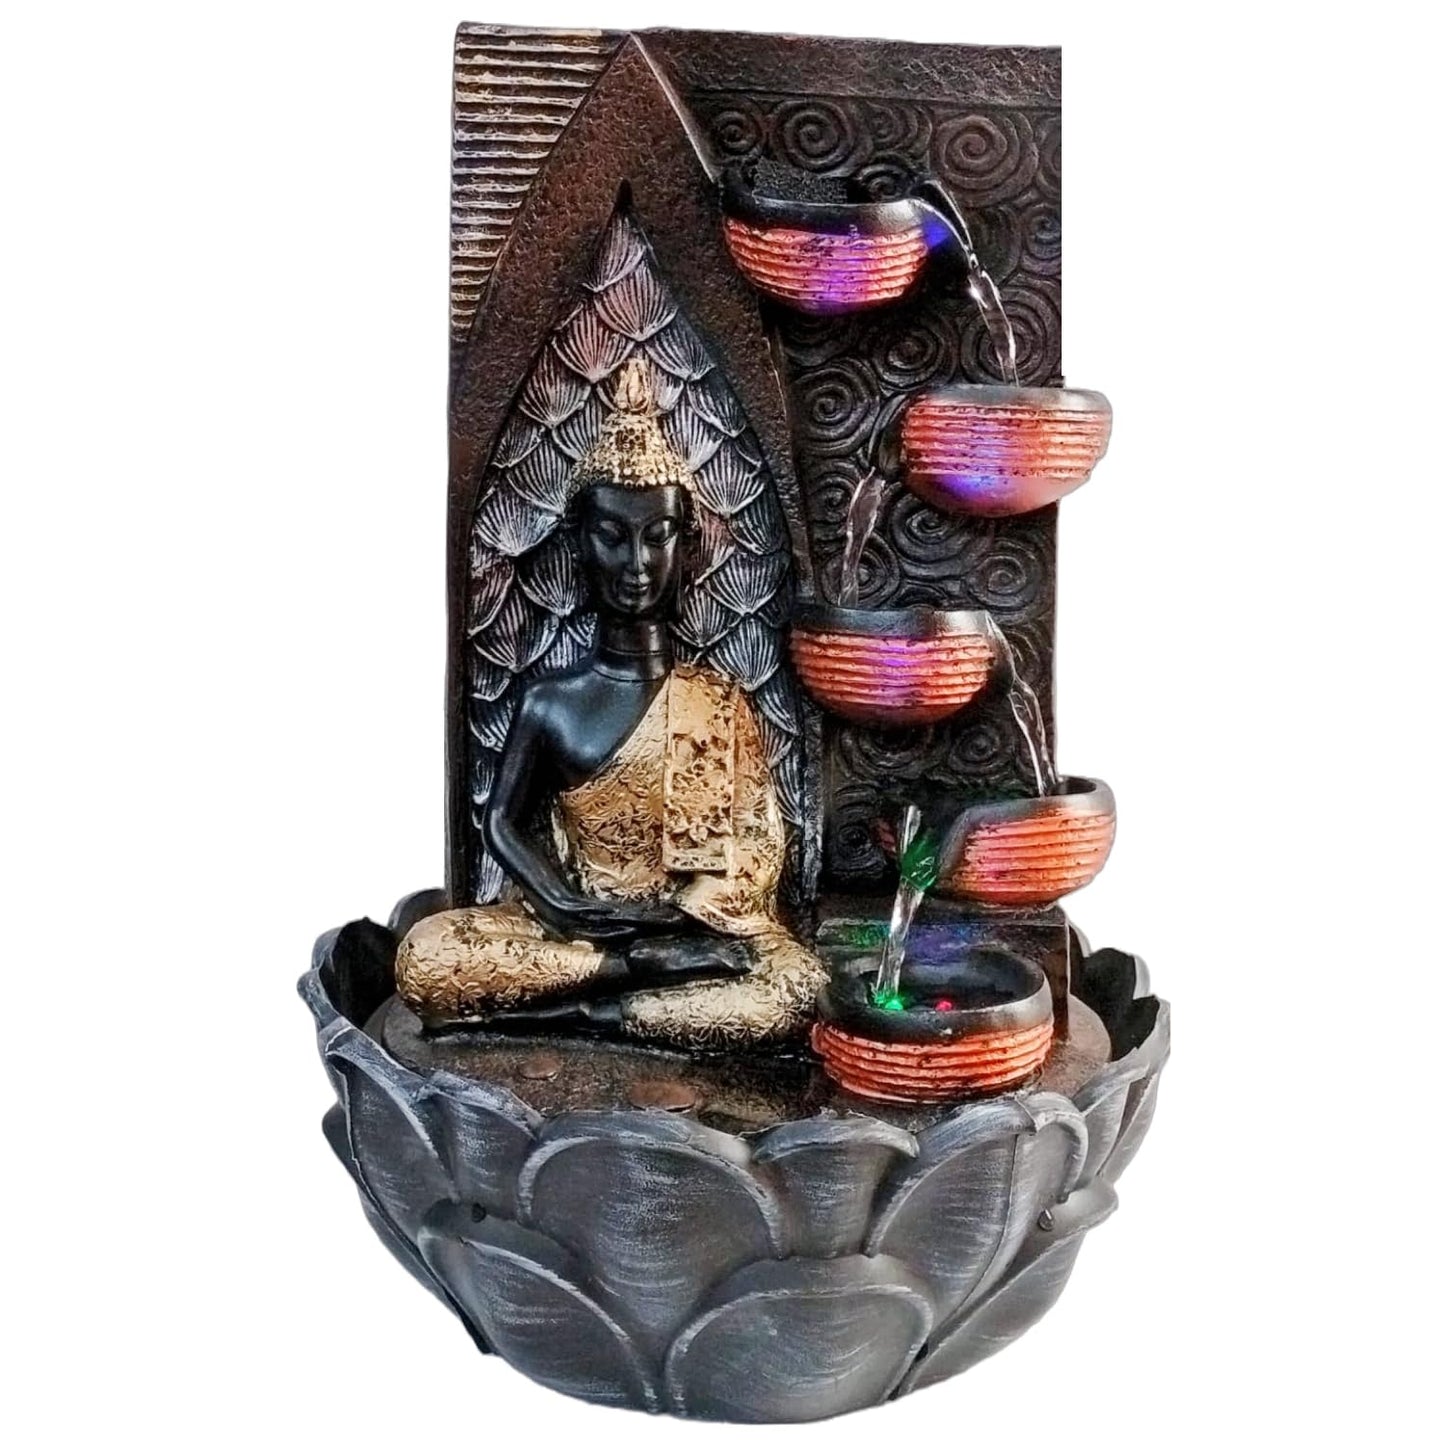 Water Fountain ALiLA Copy of Buddha Statue Waterfall Fountain with LED Lights for Home/Living room/Garden/Table/ Decoration gifting item Water Fountain